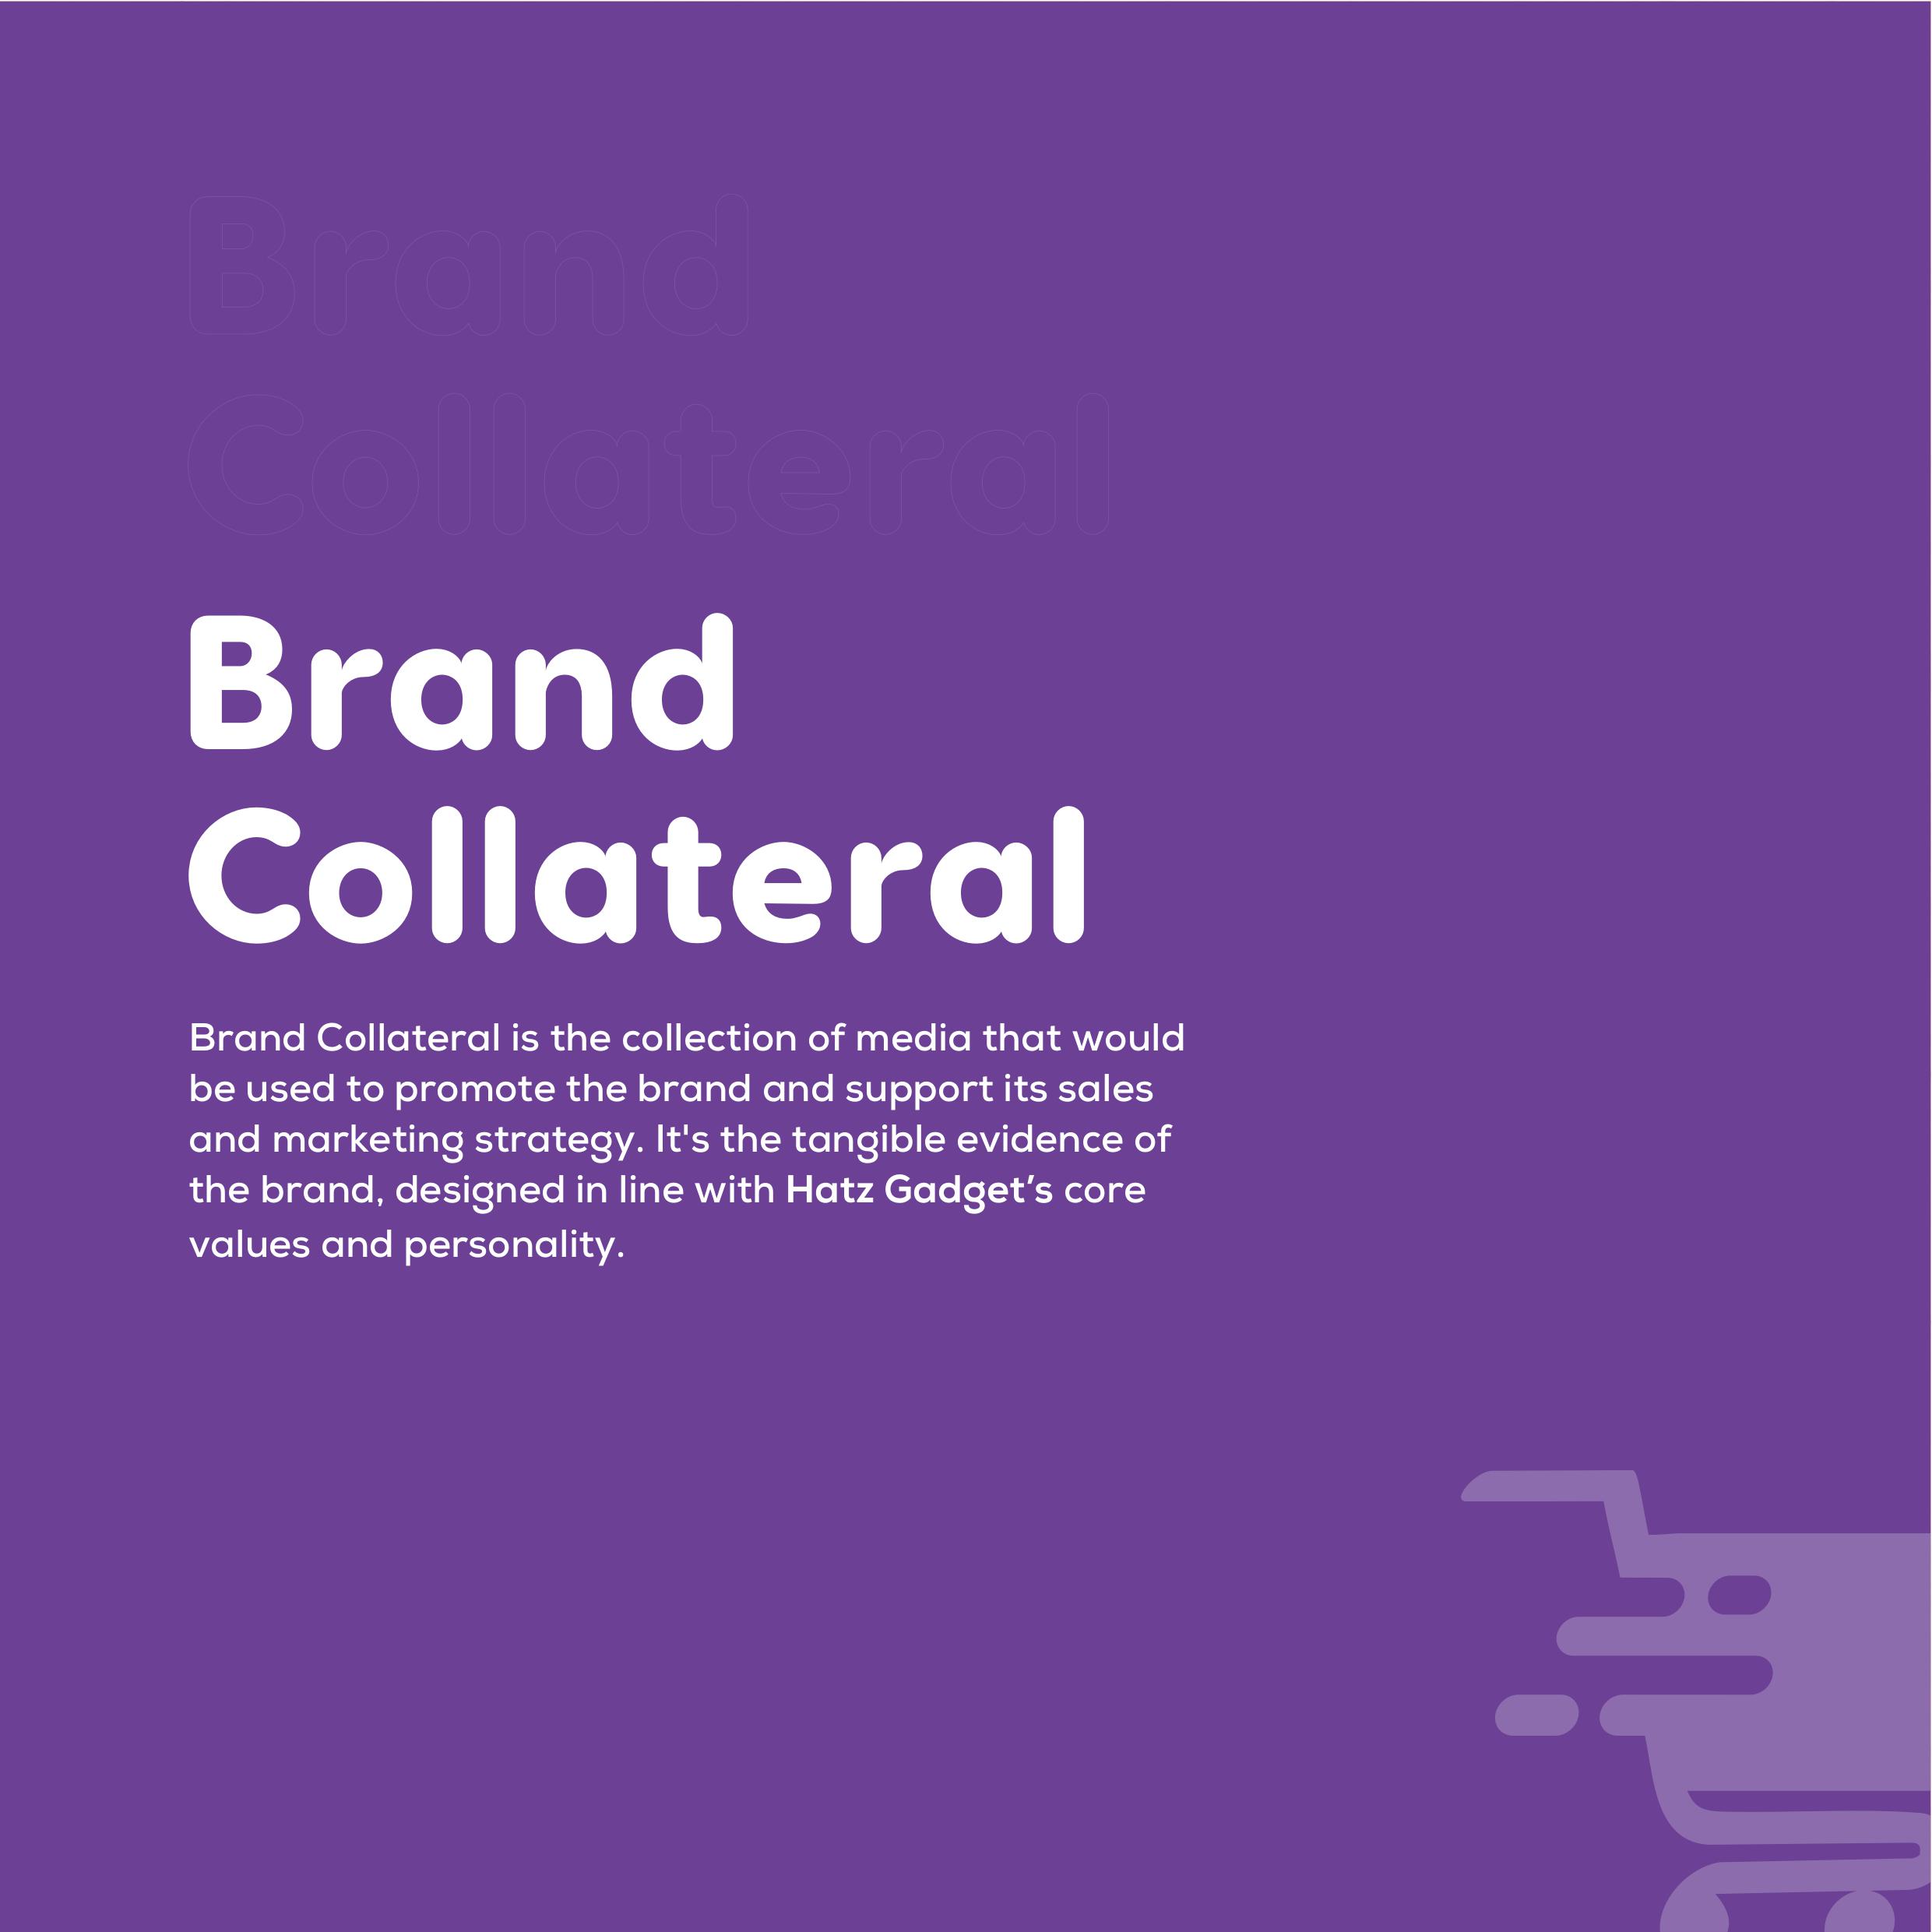 Brand Collateral